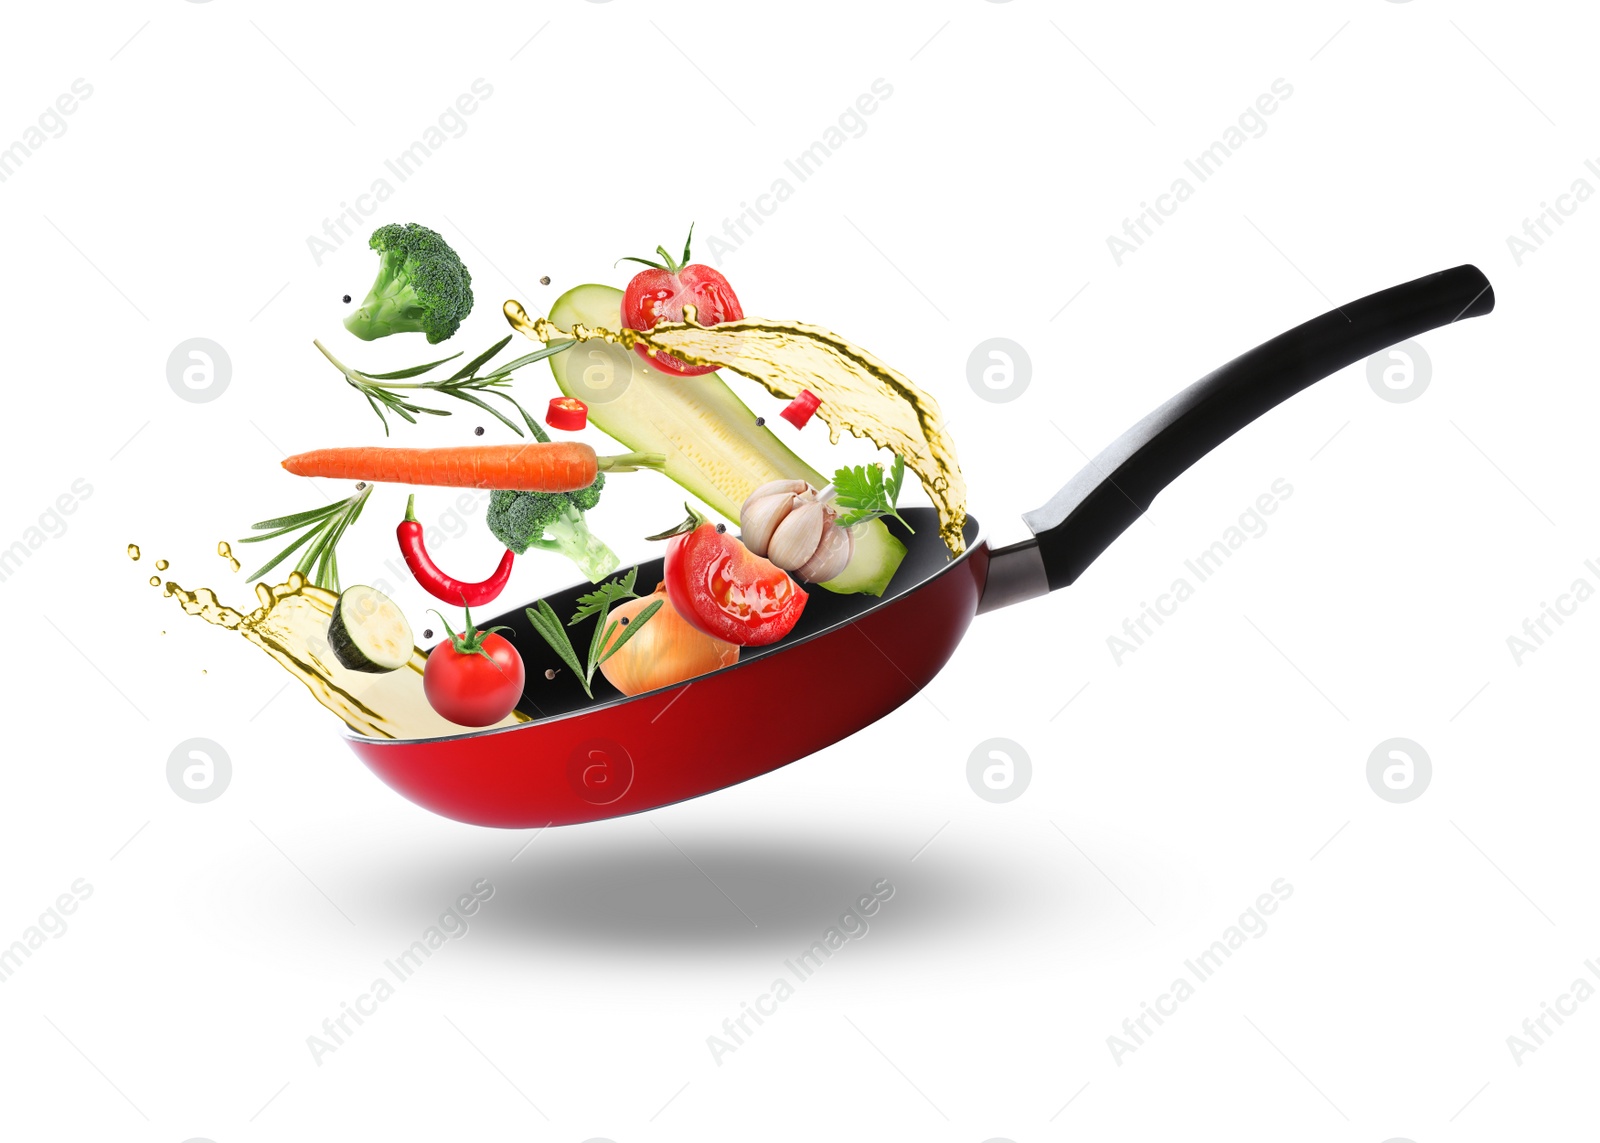 Image of Tasty fresh ingredients and frying pan on white background